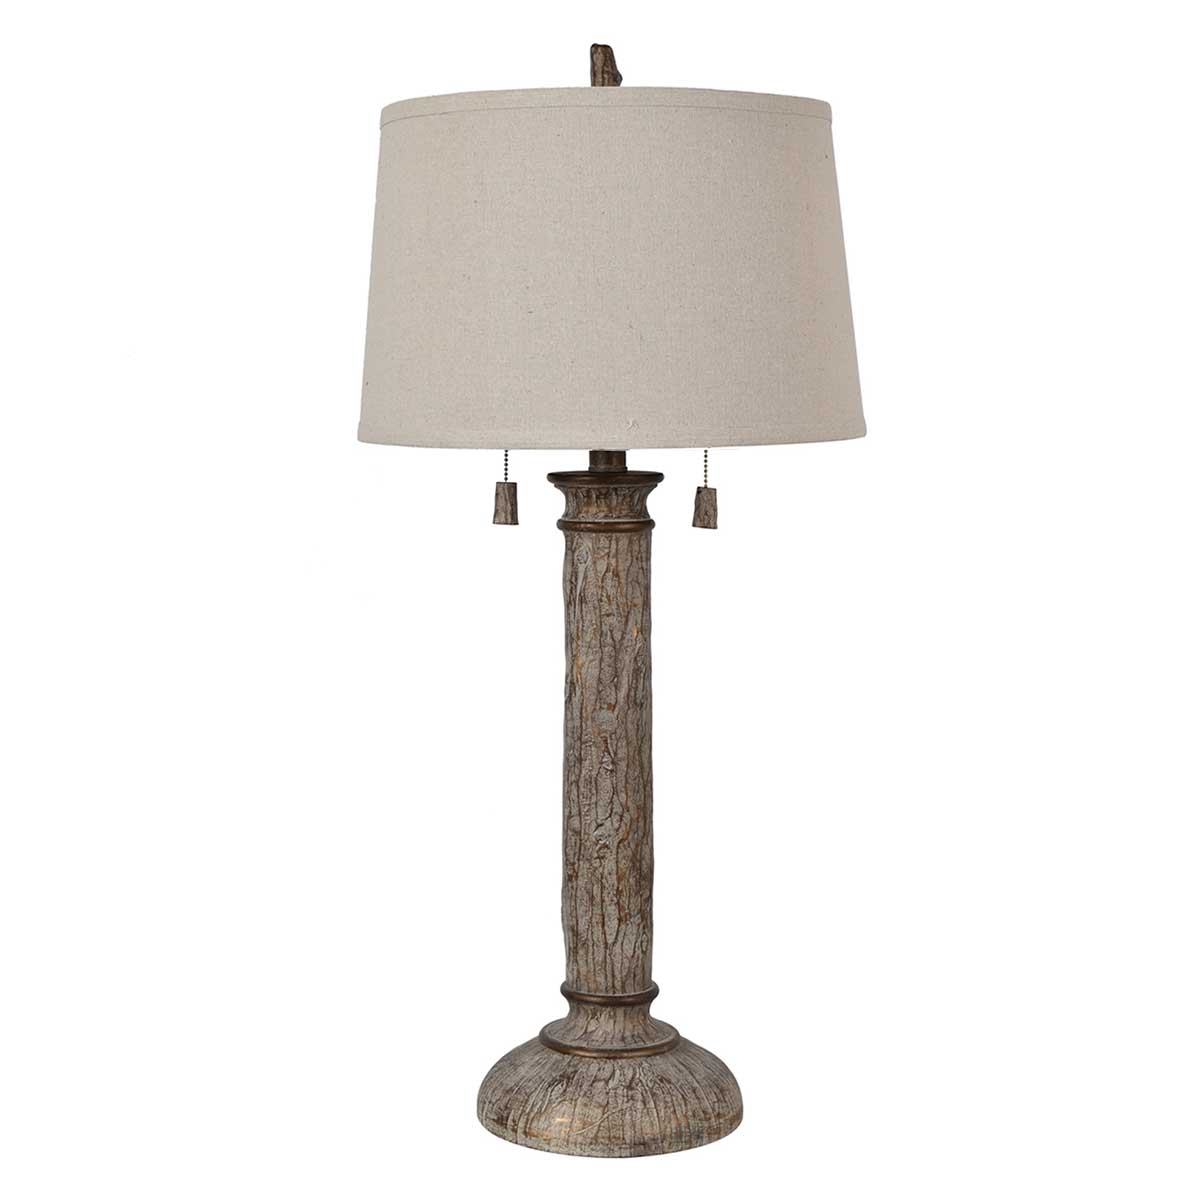 Crestview Collection Cotton Wood Table Lamp